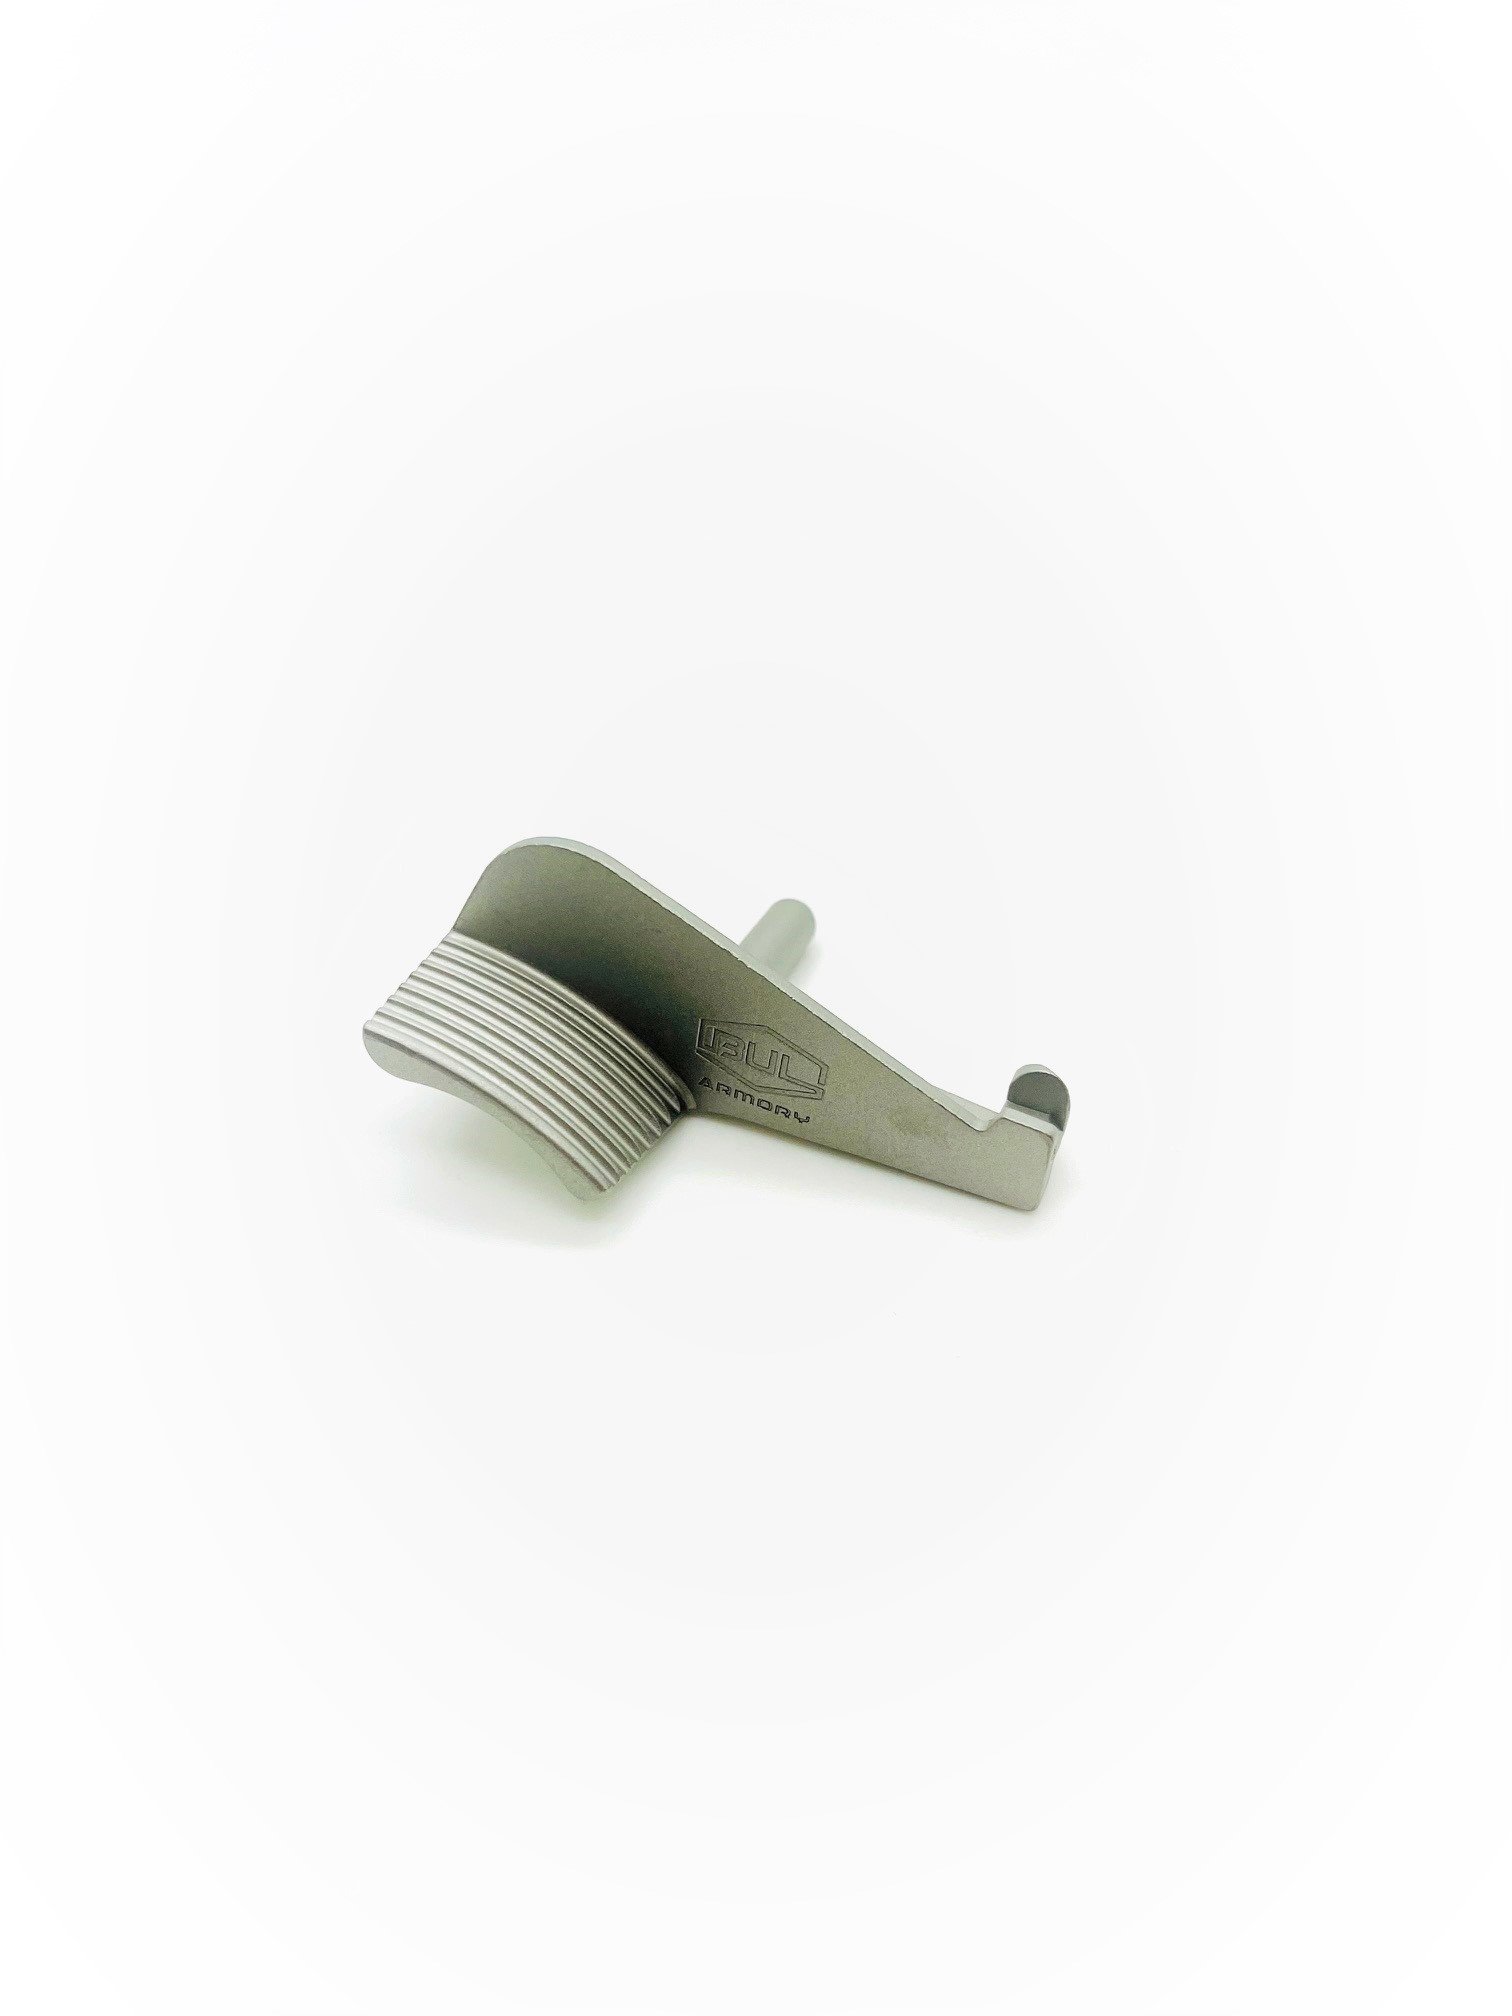 Slide stop with thumb rest stainless steel